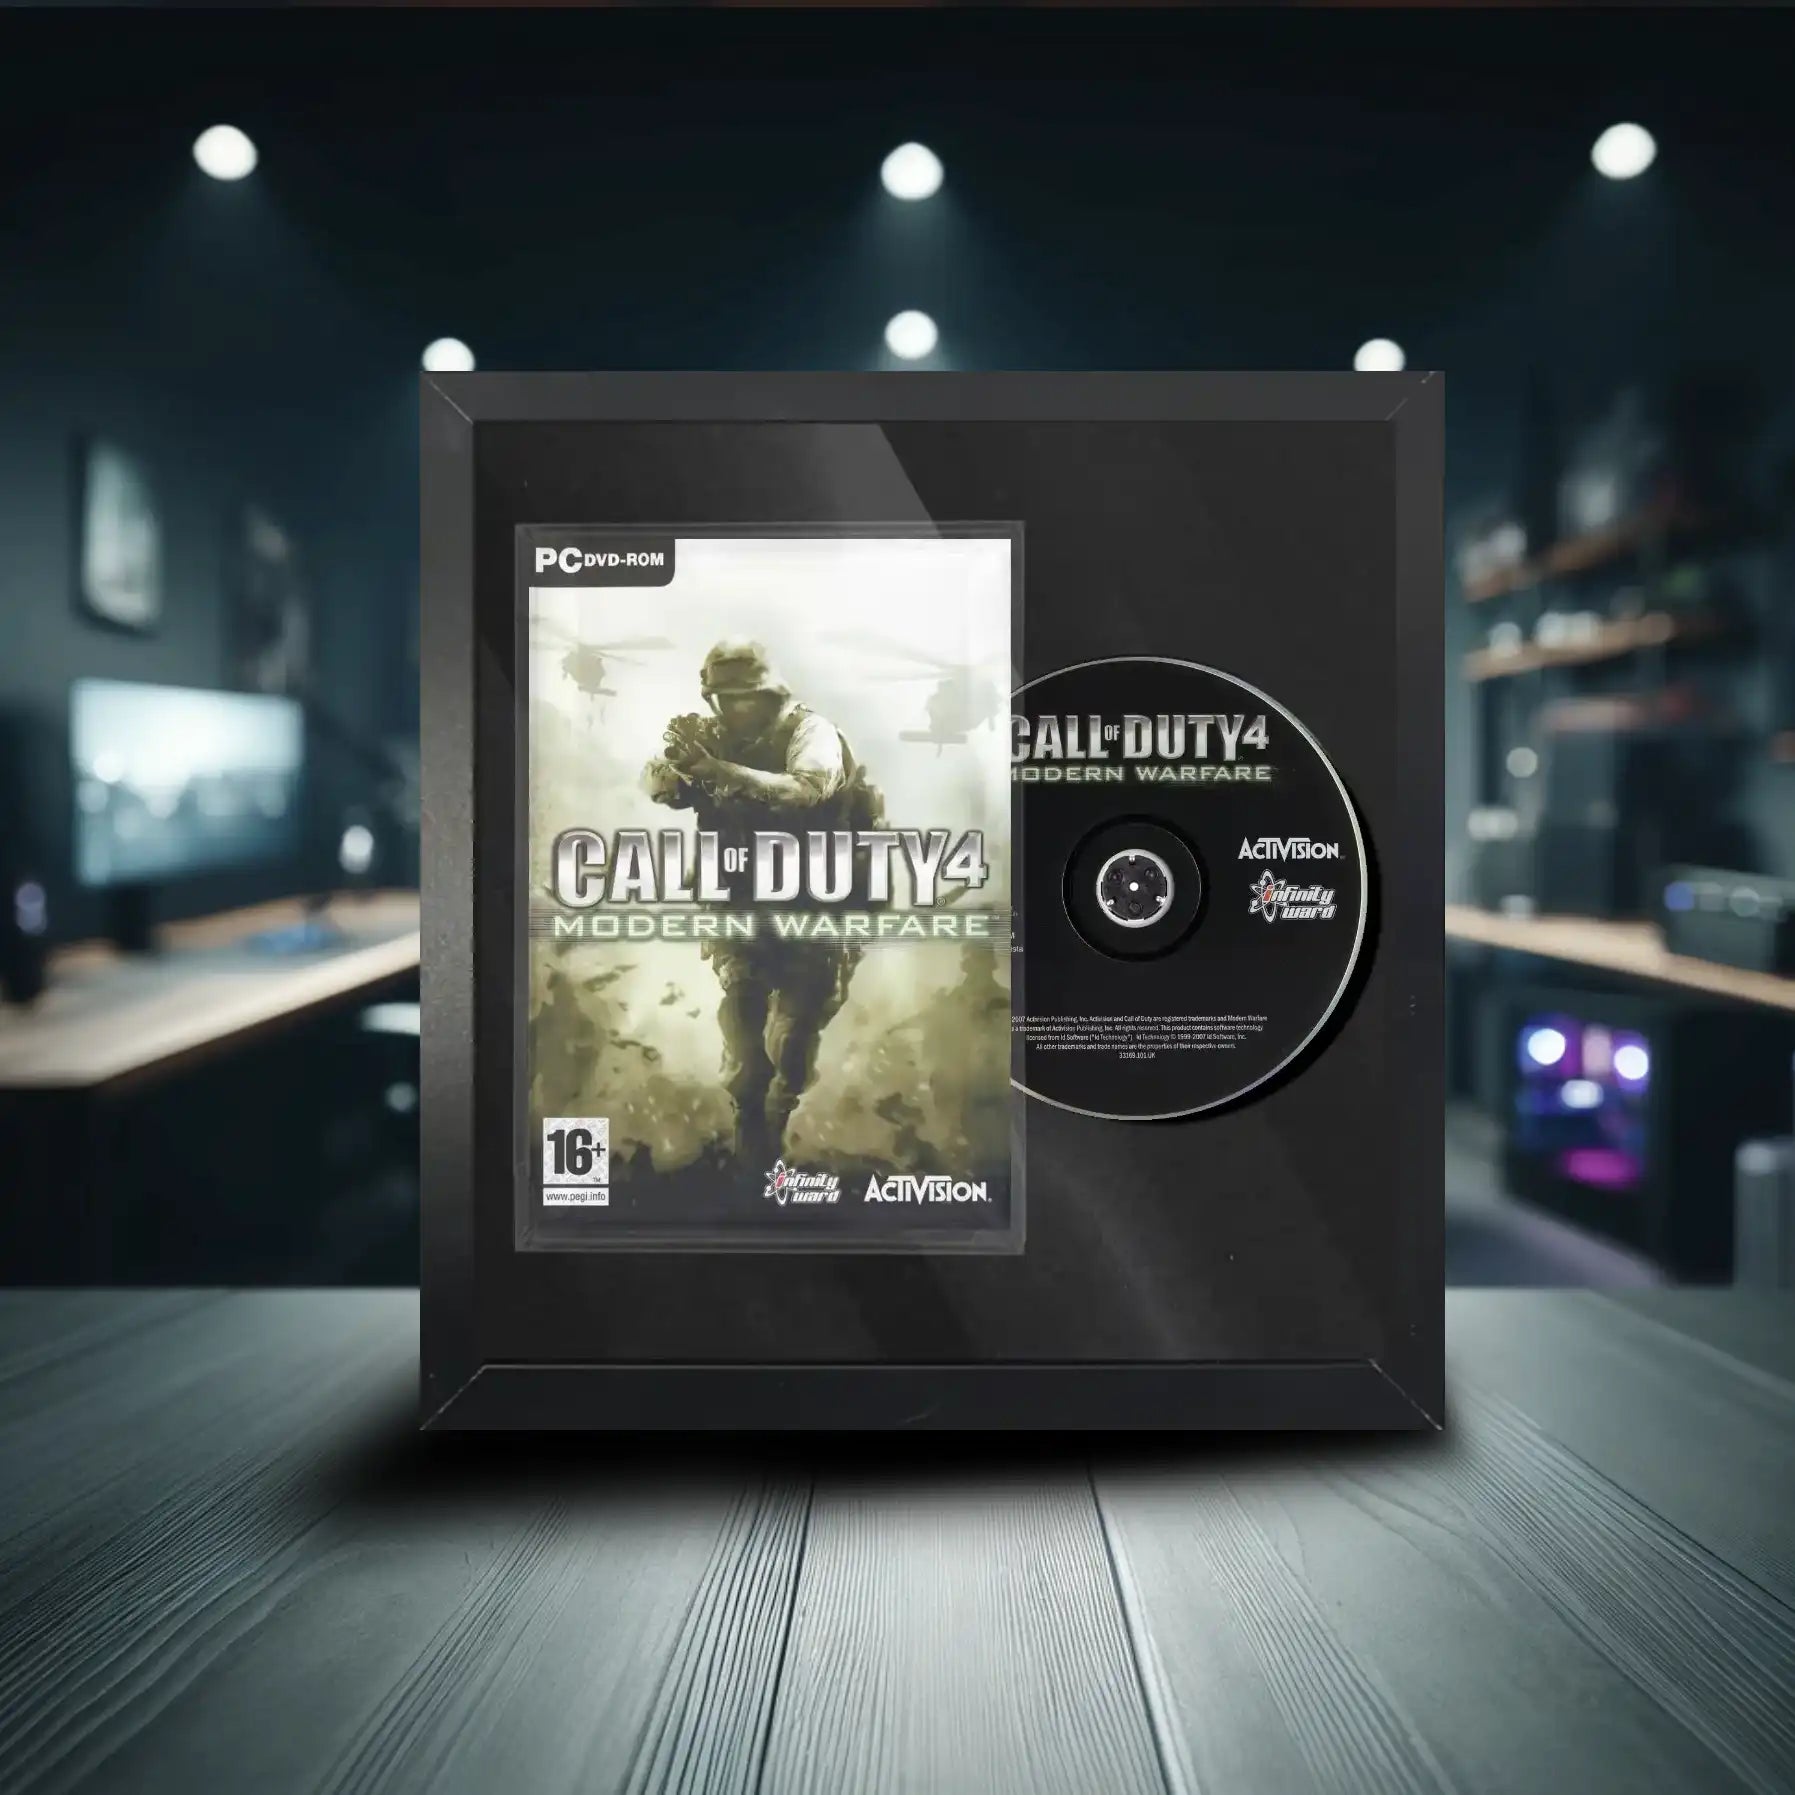 Call of Duty 4 Modern Warfare Windows PC video game inside a frame. The frame safely displays the game case and disc.